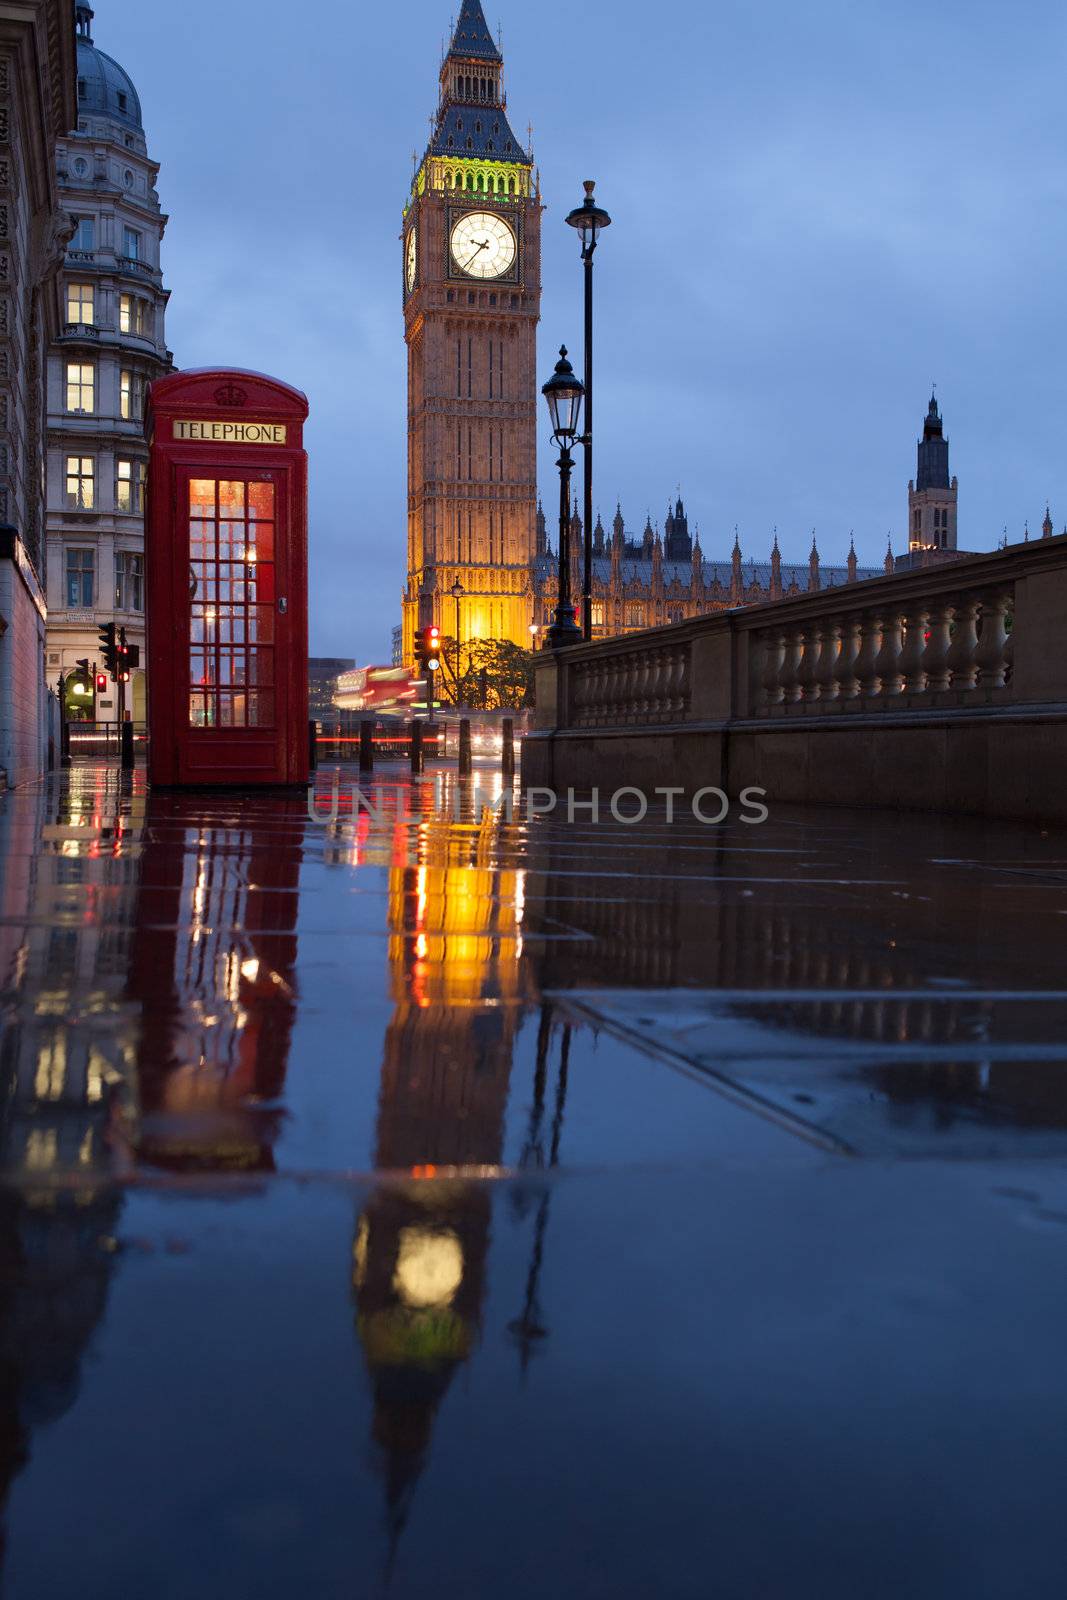 Red public telephone box and illuminated clock on Big Ben tower of Westminster Palace in twilight with reflection on wet footway, Great Britain